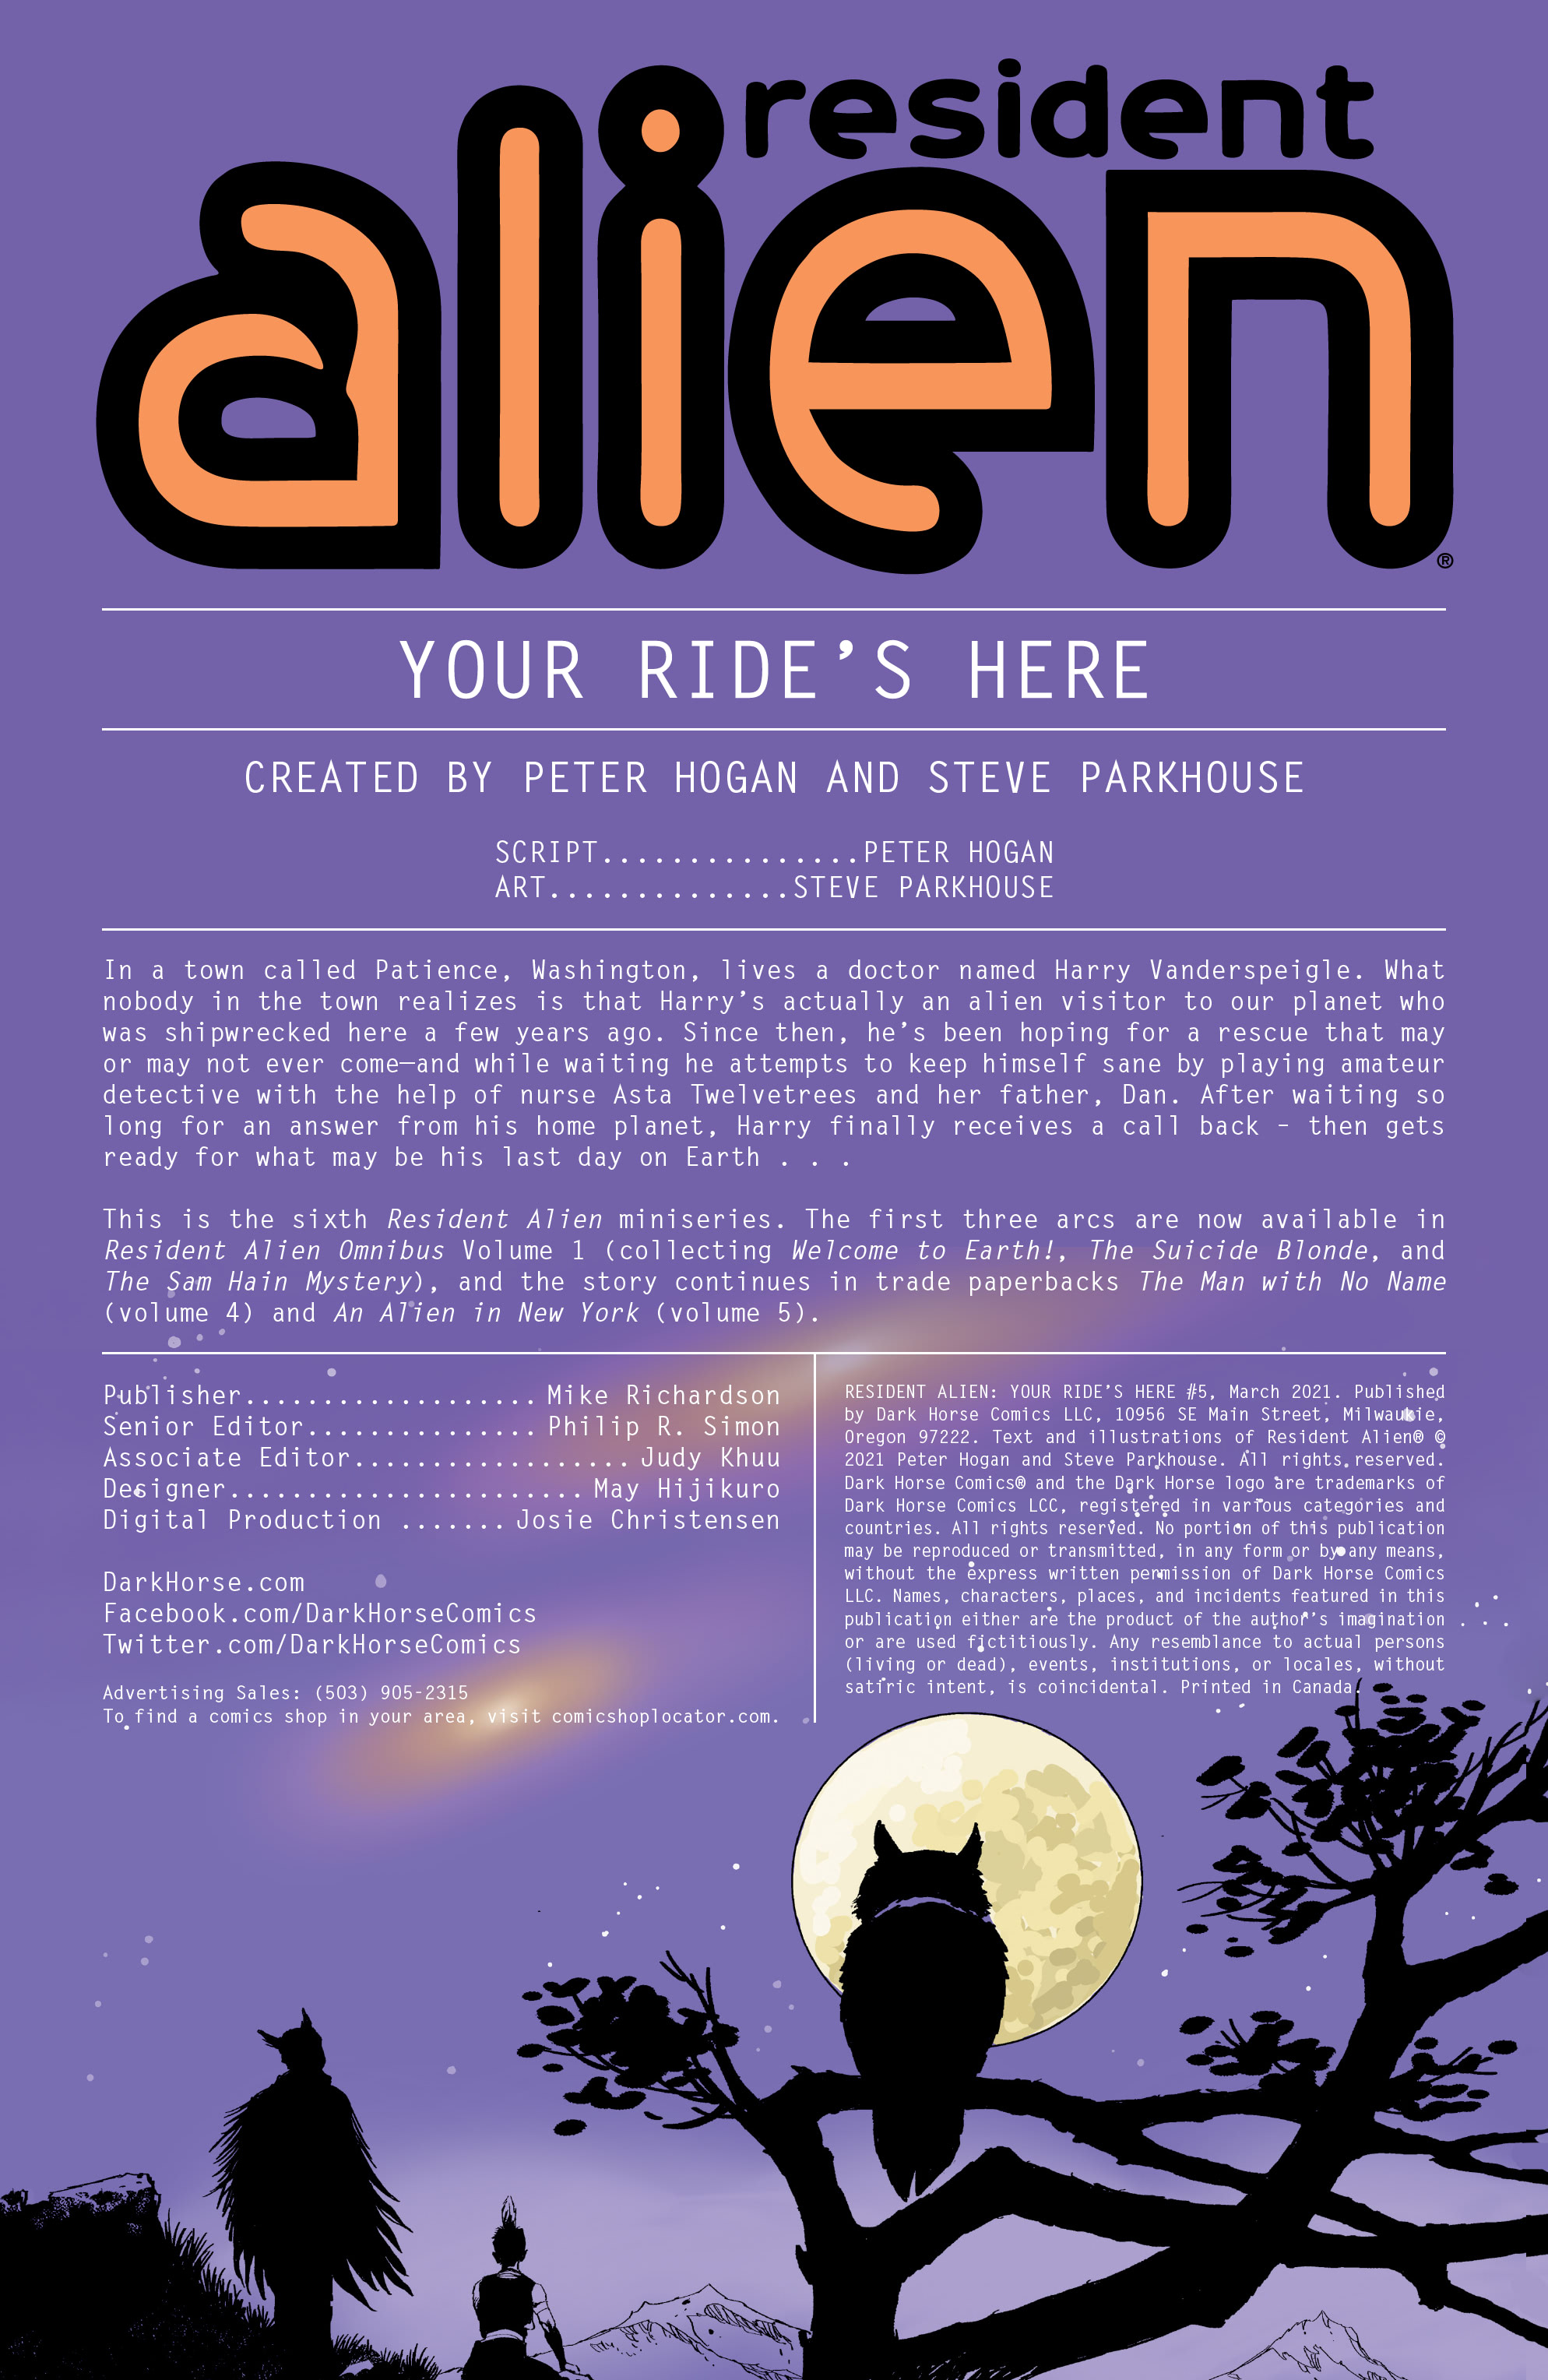 Read online Resident Alien: Your Ride's Here comic -  Issue #5 - 2